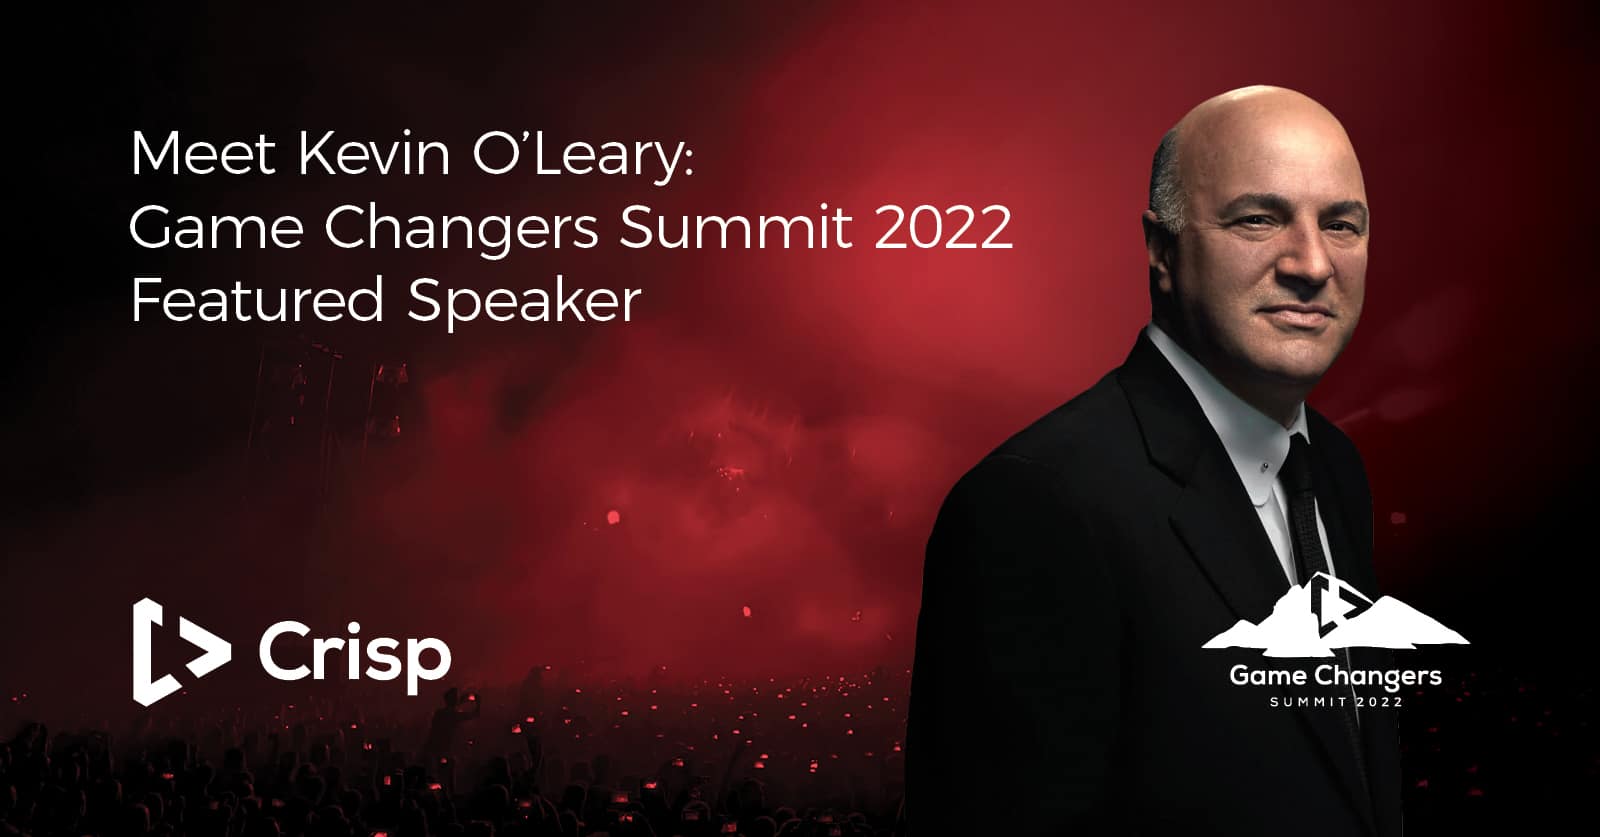 Meet Kevin O'Leary: Game Changers Summit 2022 Featured Speaker